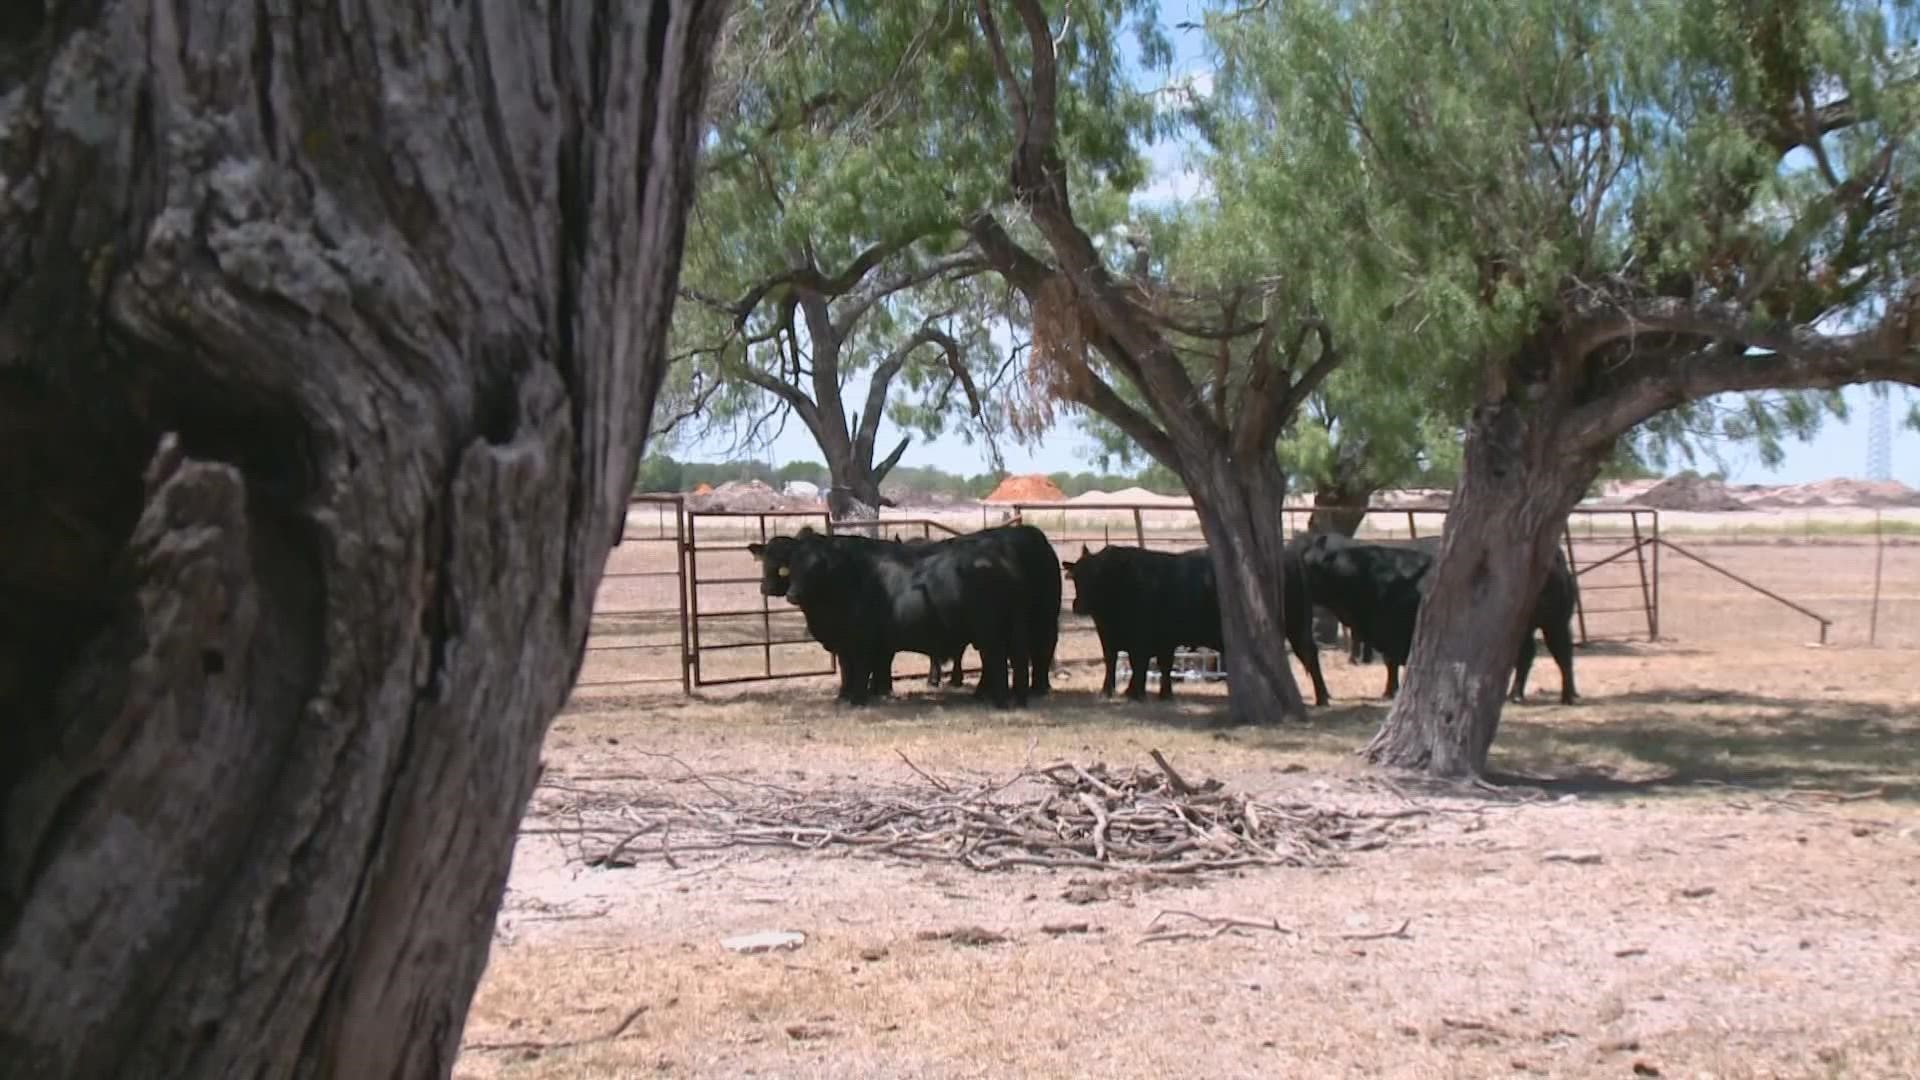 One San Antonio rancher says due to the heat and drought conditions, there's been no grass for cows to graze on.